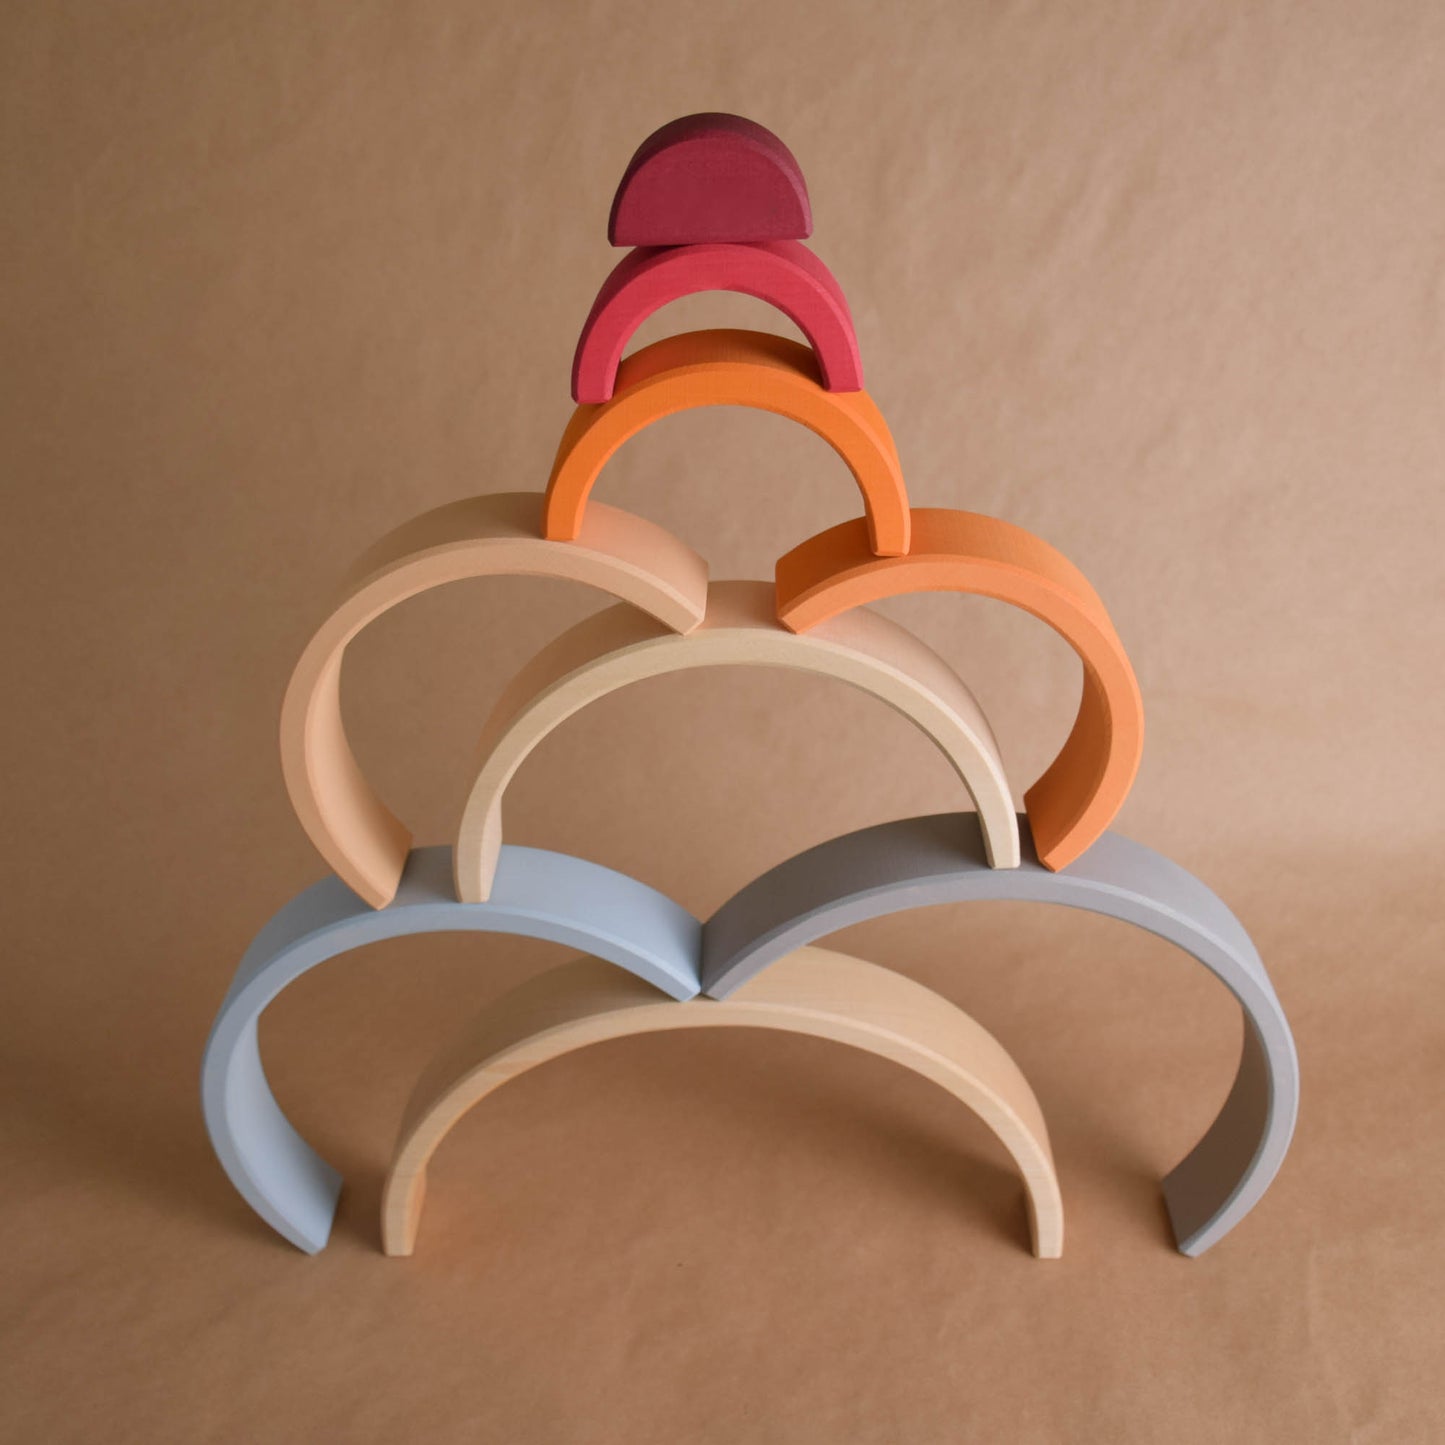 Personalized Baby Gift Wooden Rainbow Stacking Toy Neutral 9 pc.